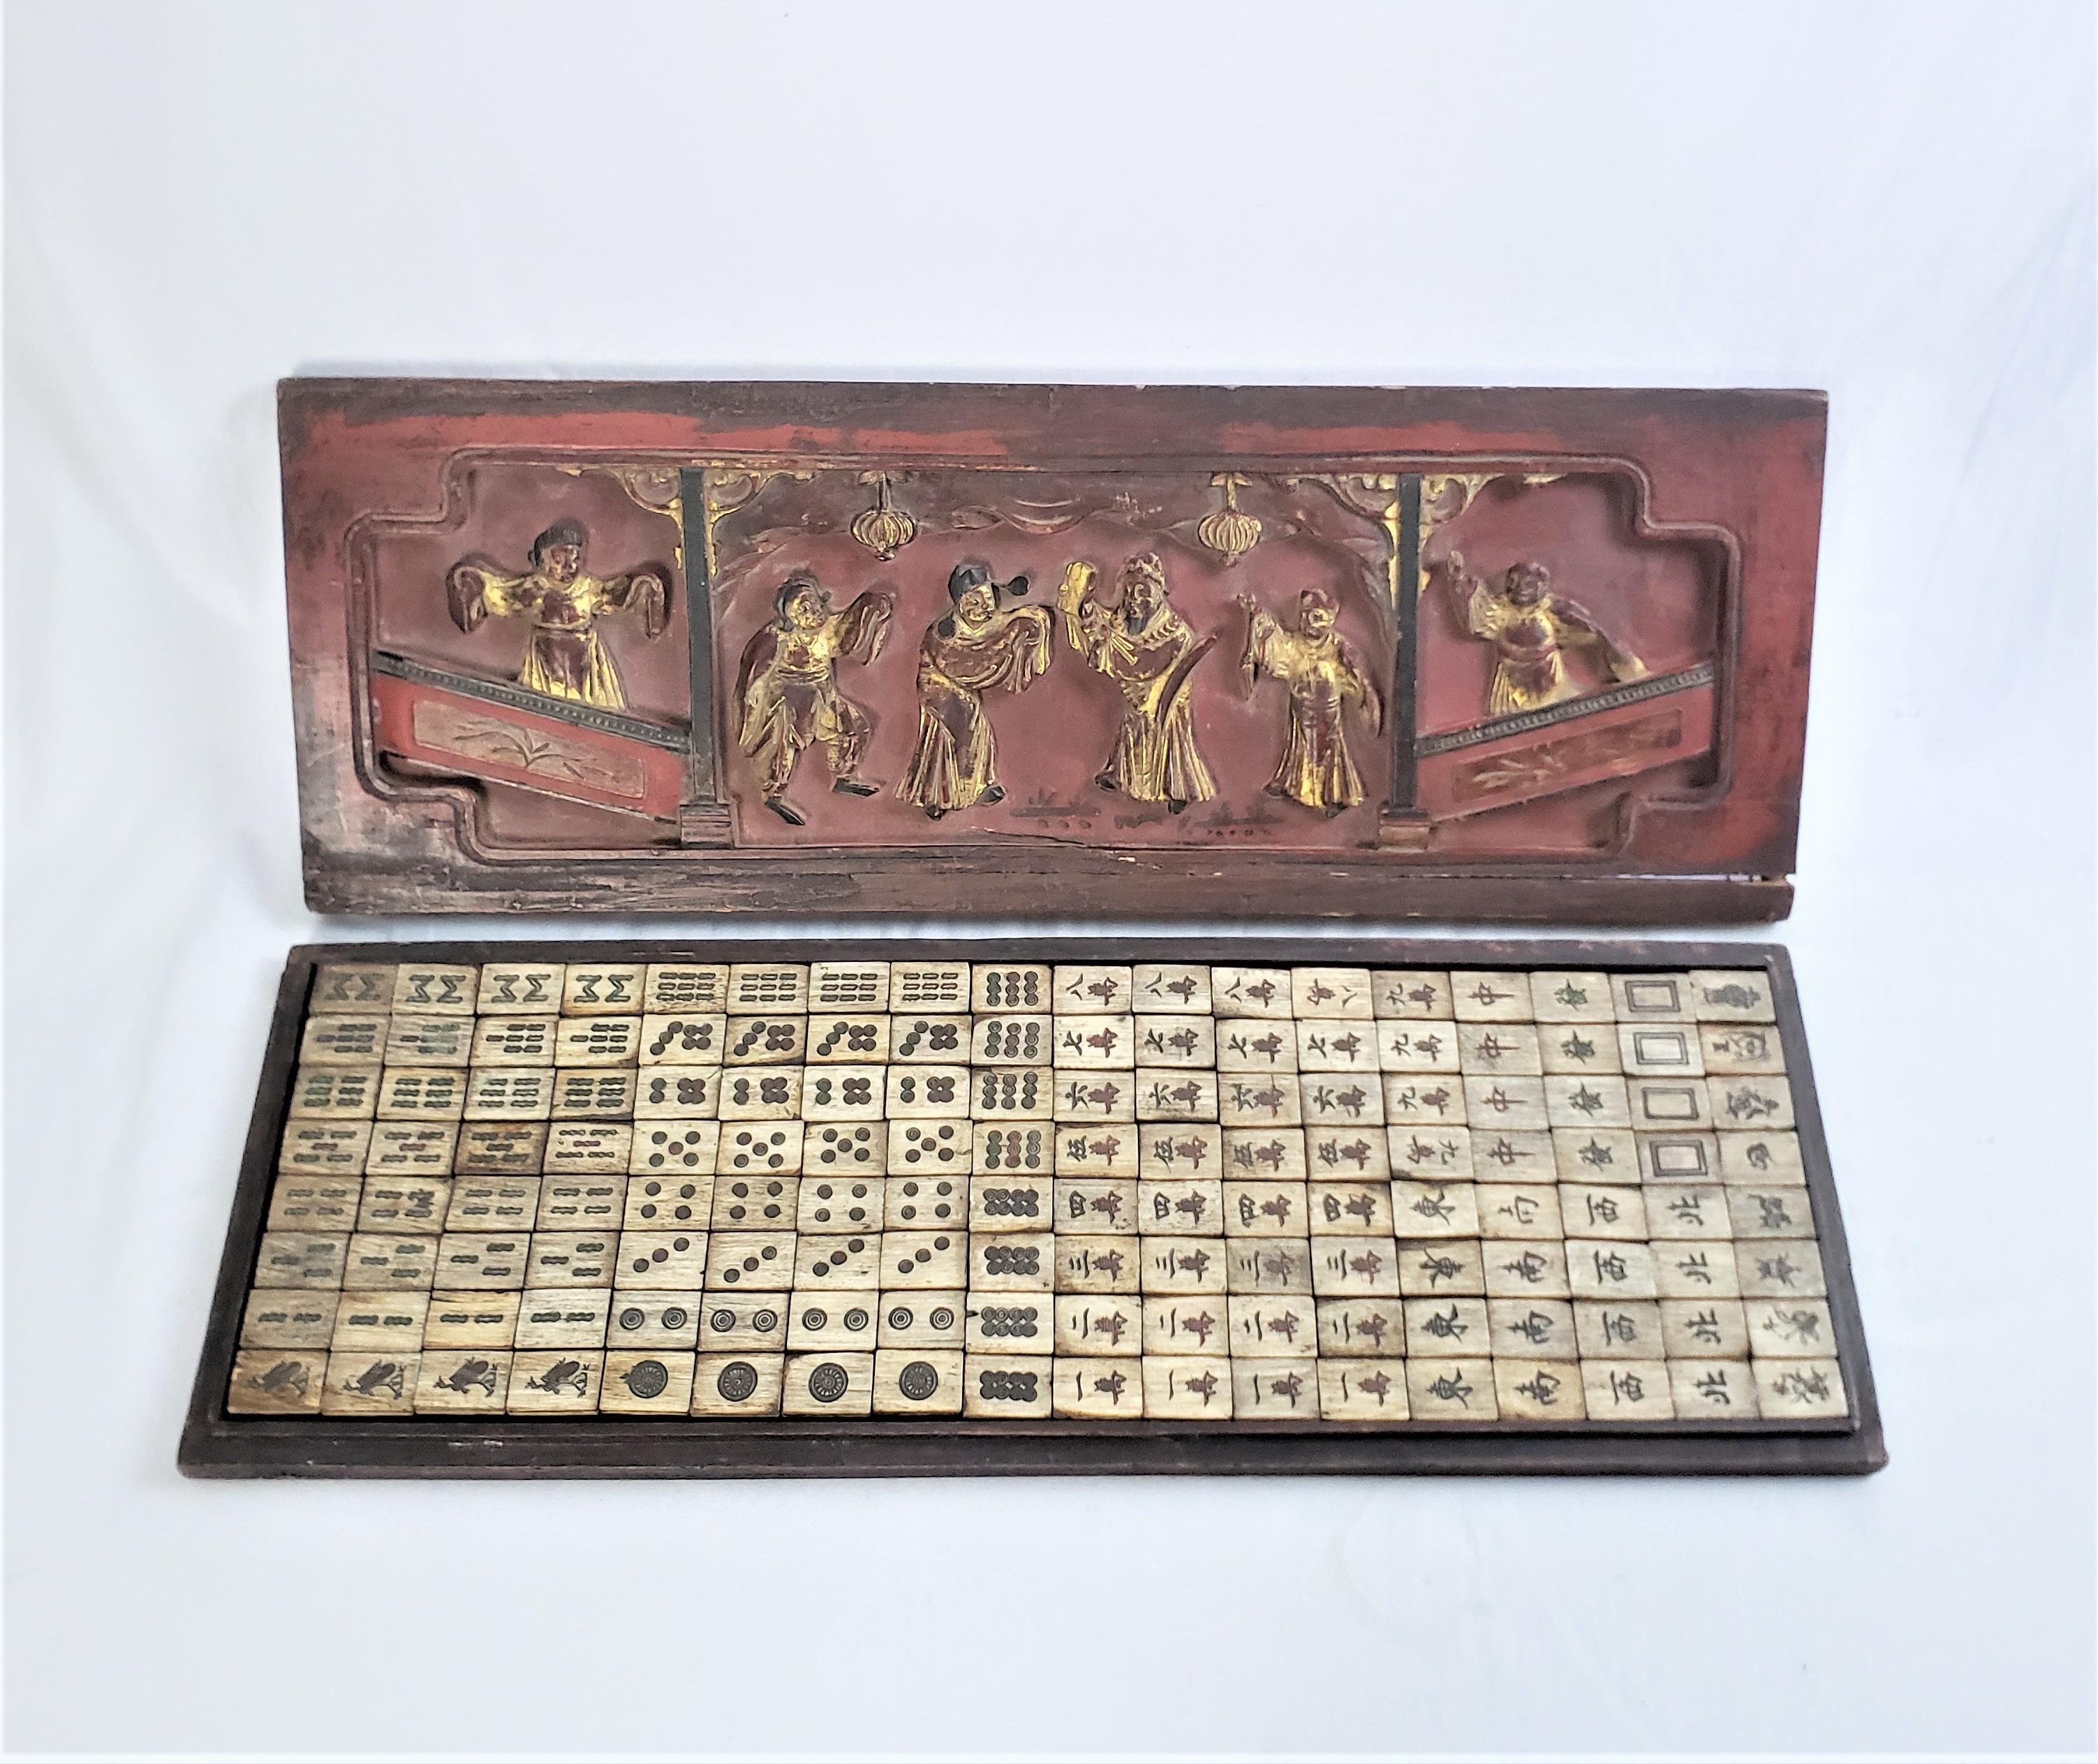 This antique Mahjong set is unsigned and documentation shows it to have originated from China and date to approximately 1900 and done in the Chinese Export style. The set is composed of 144 tiles composed of a ebonized softwood with a bakelite top